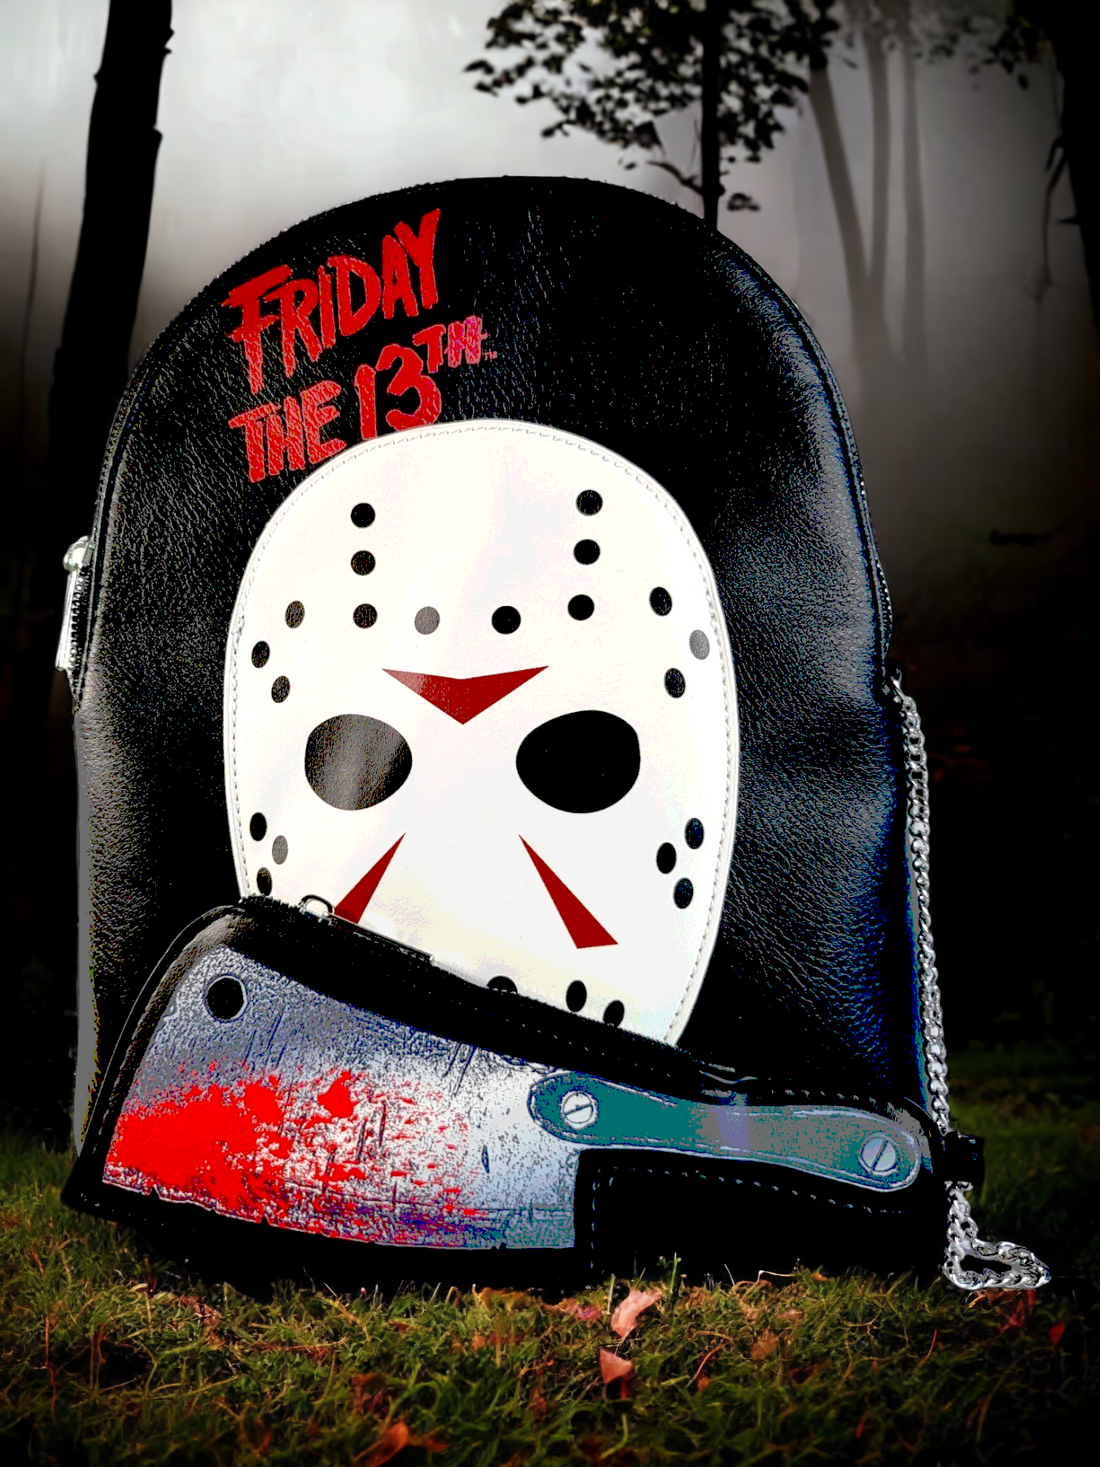 Friday The 13th: Equip Yourself with the Ultimate Gear!